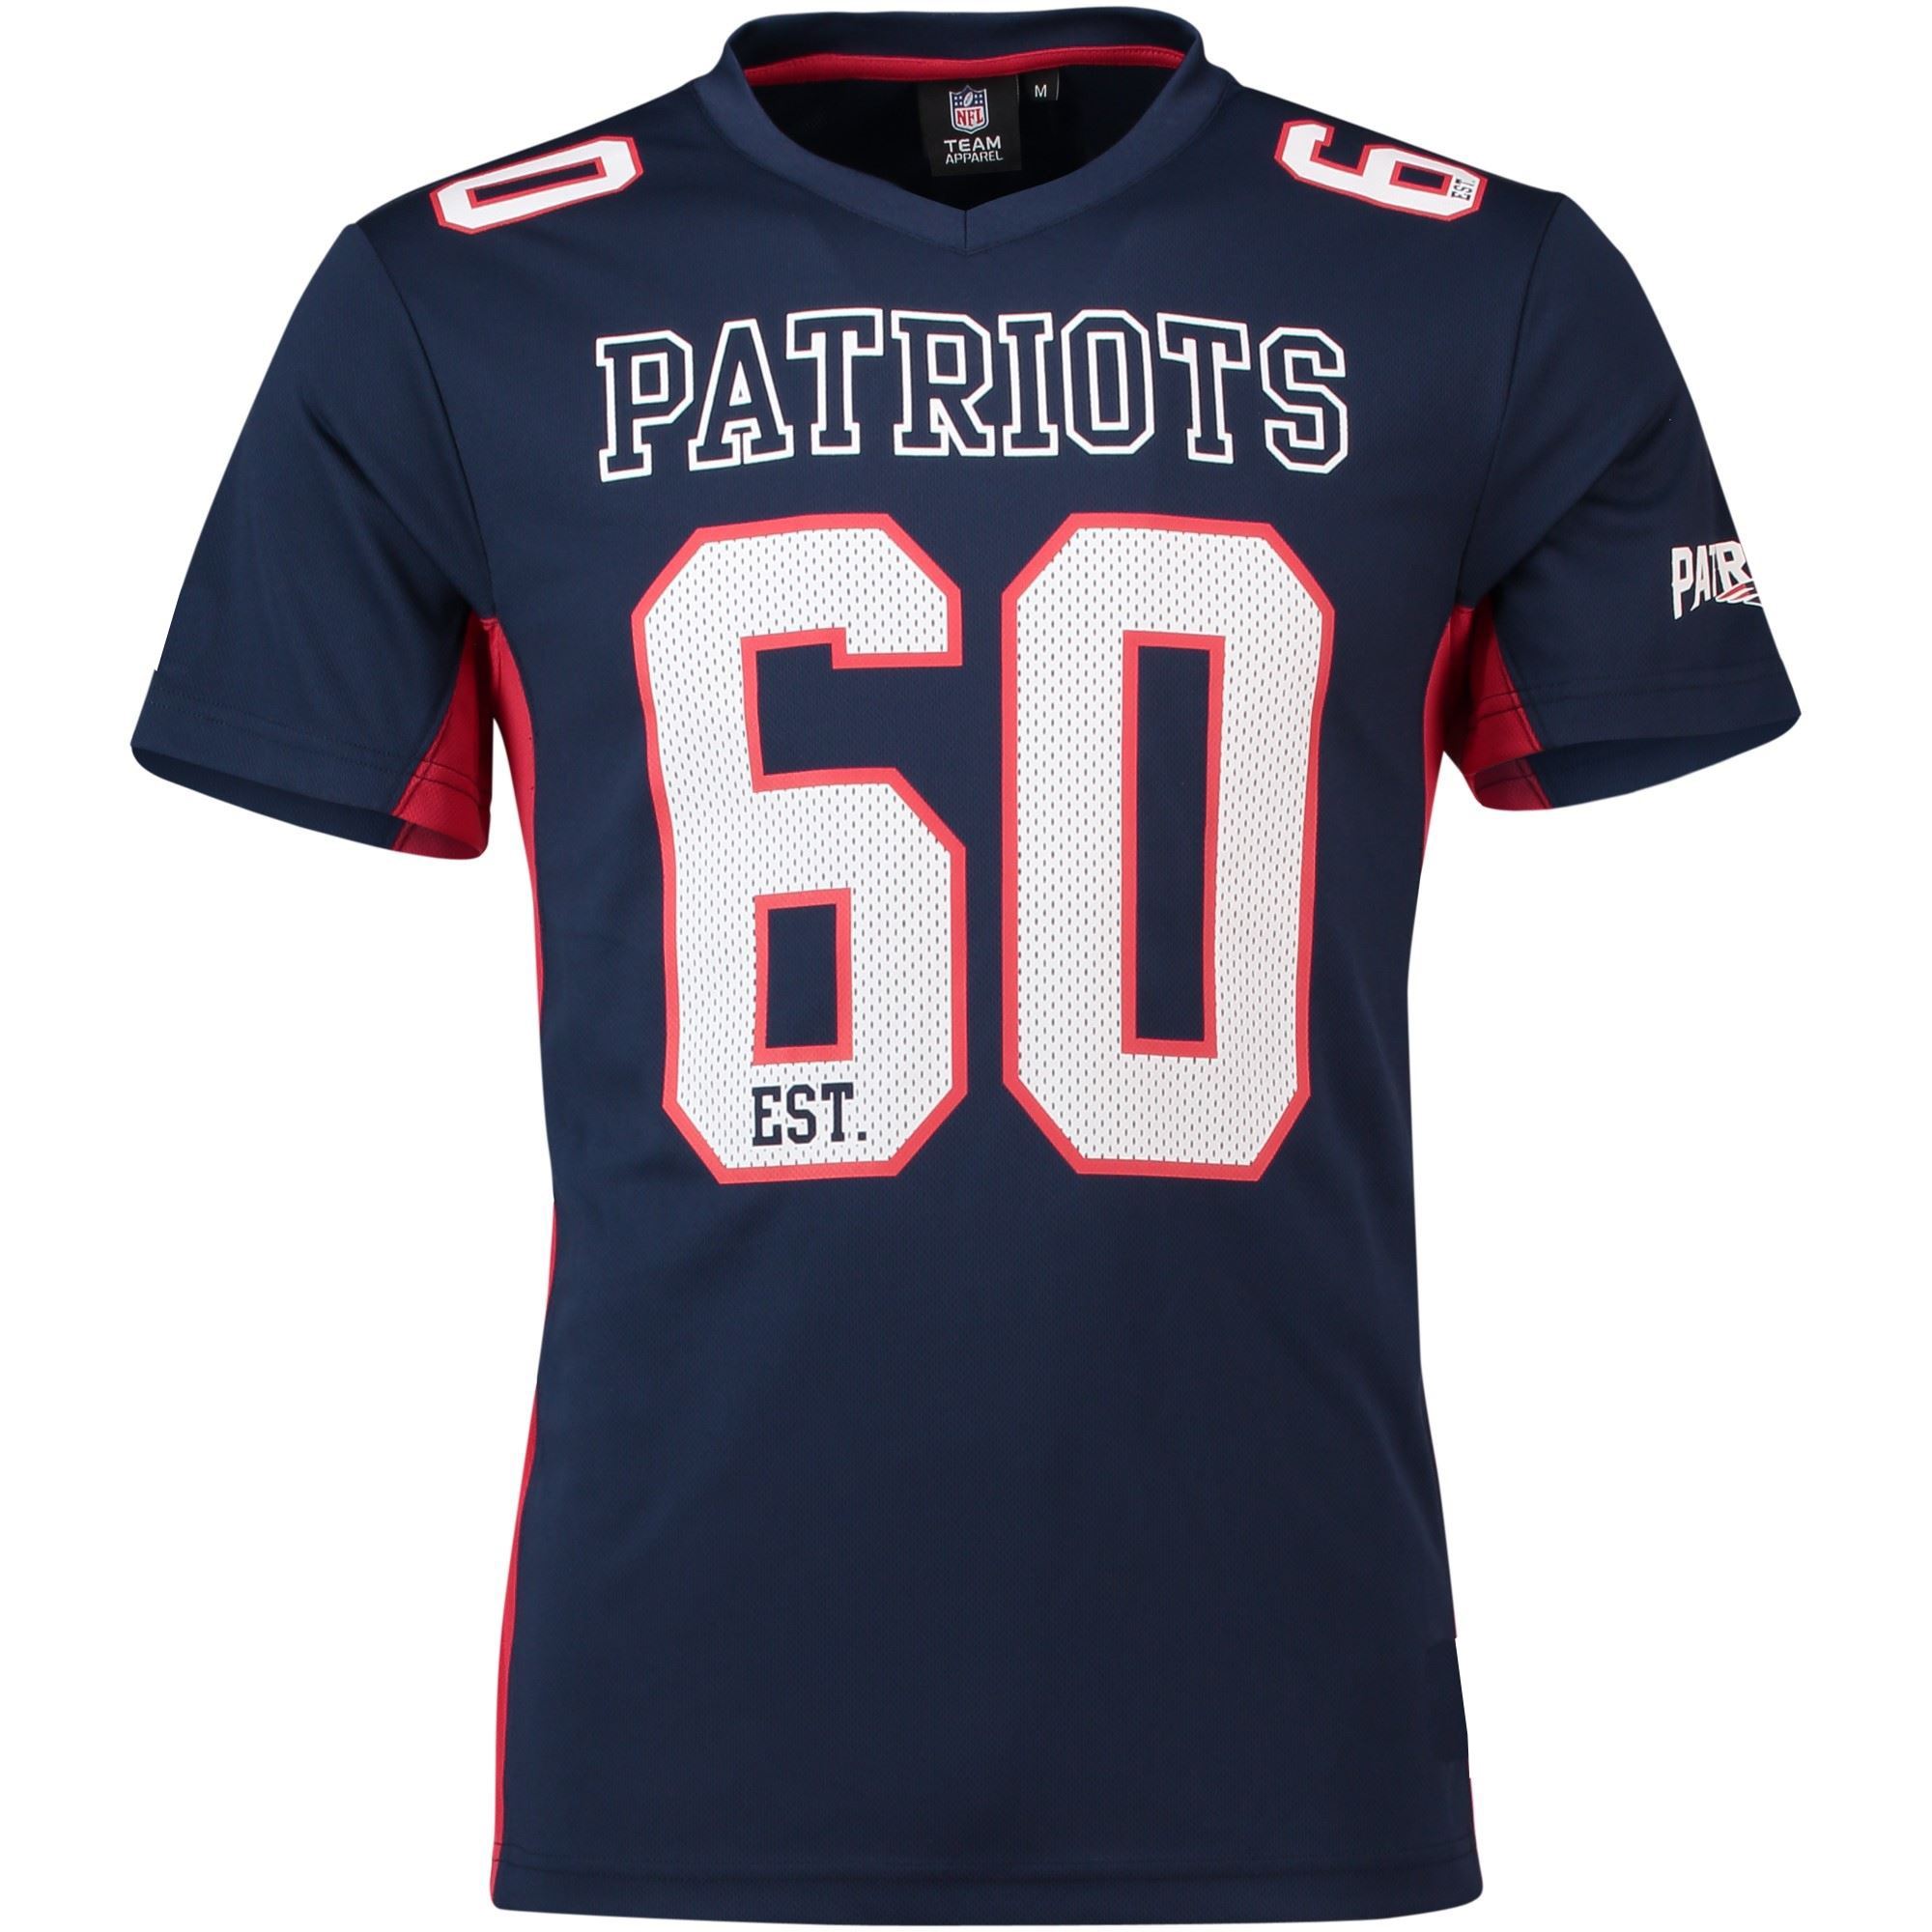 New England Patriots Navy NFL Poly Mesh Supporters Jersey Fanatics